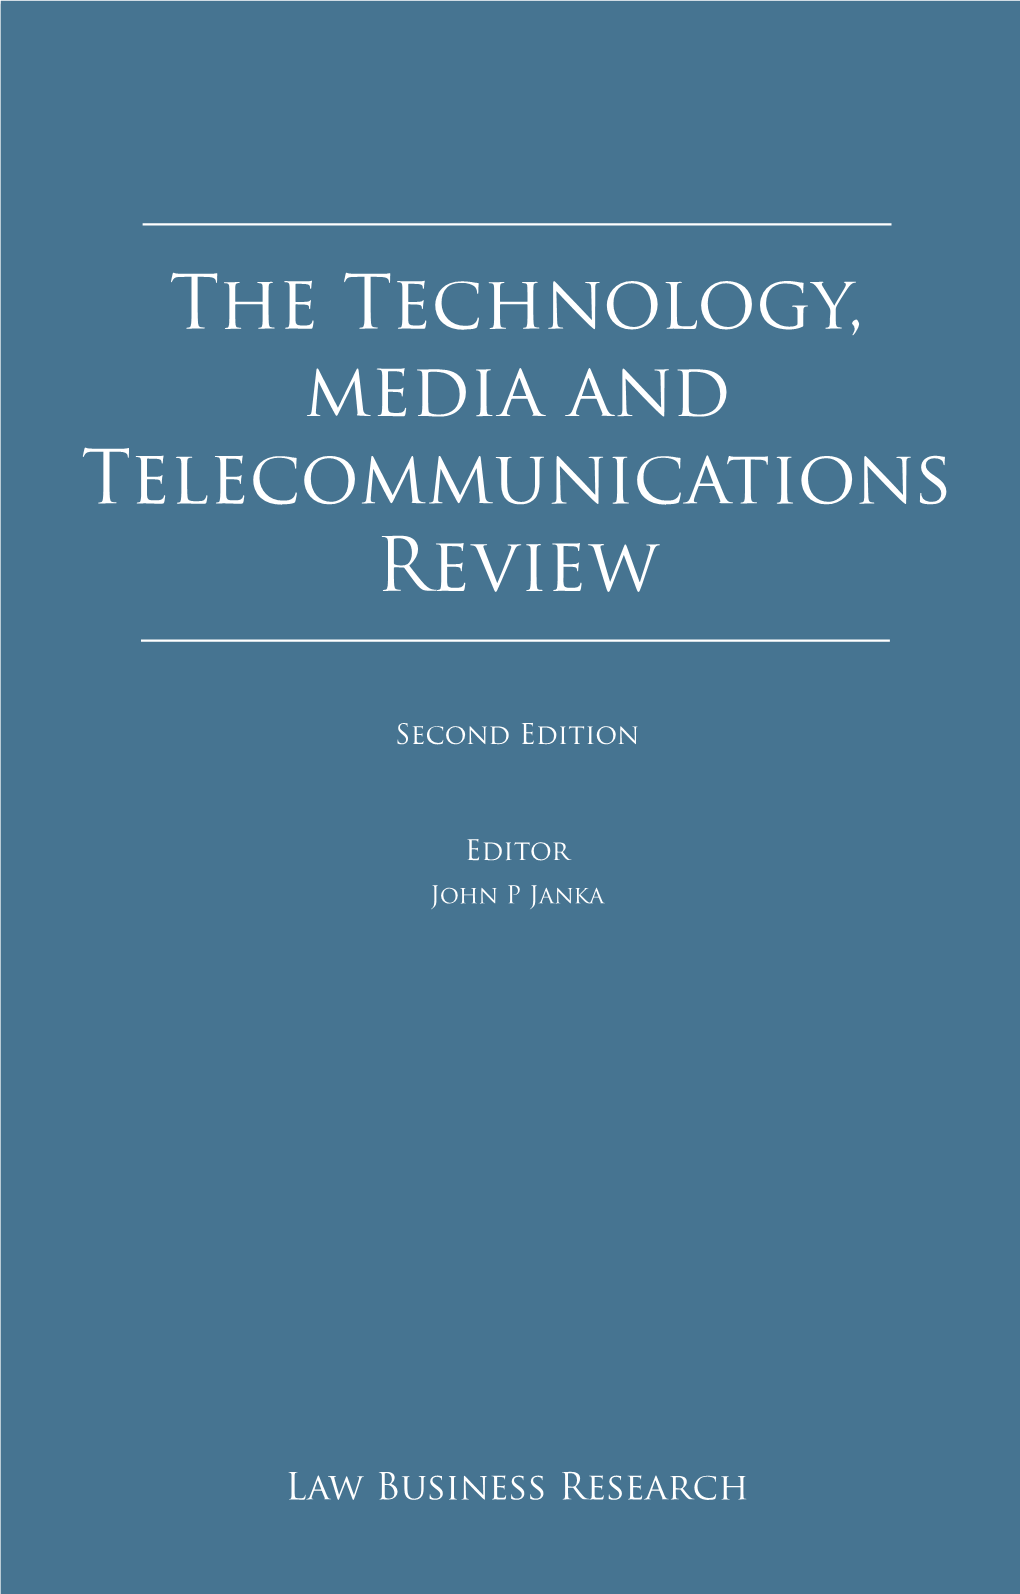 The Technology, Media and Telecommunications Review